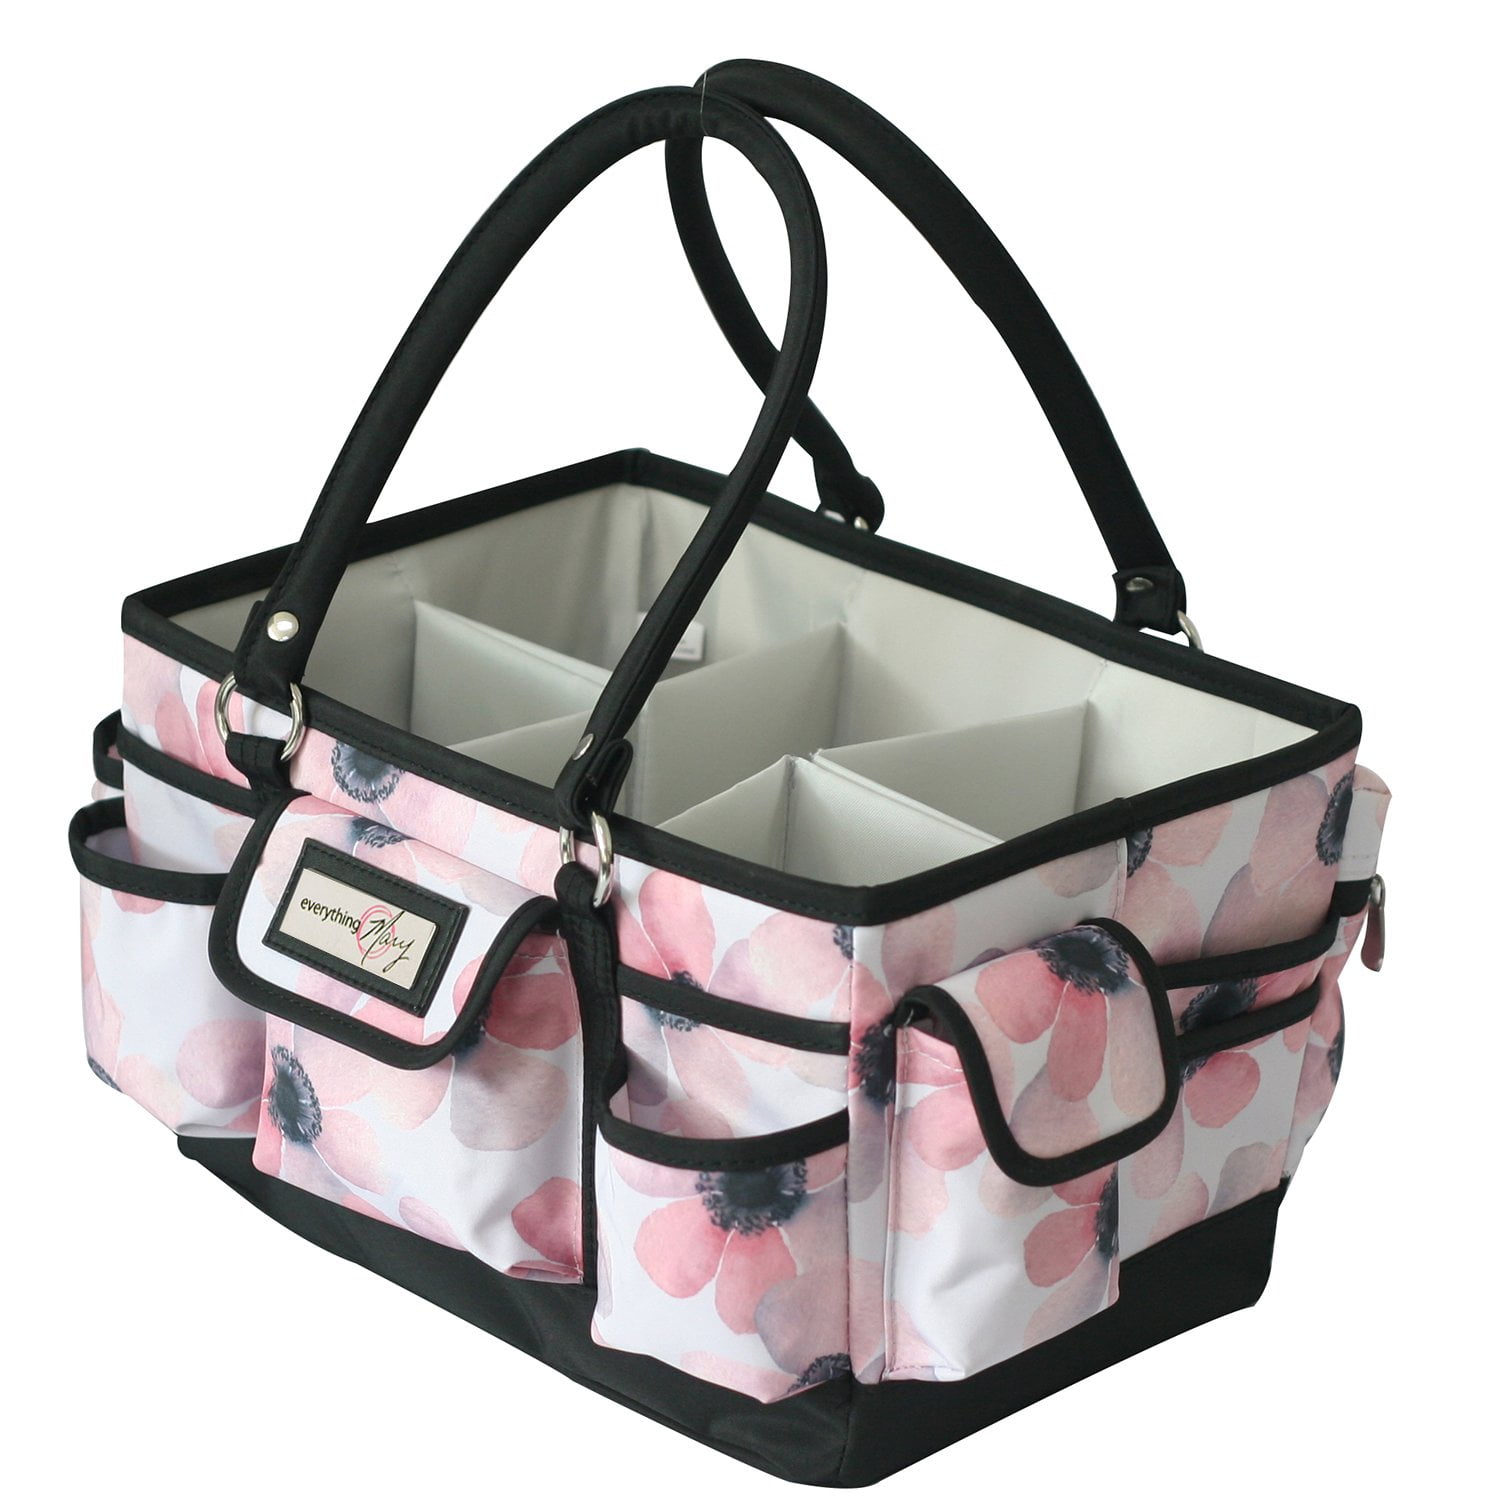 Everything Mary White Flower Deluxe Store and Tote - Storage Craft Bag Organizer for Crafts ...